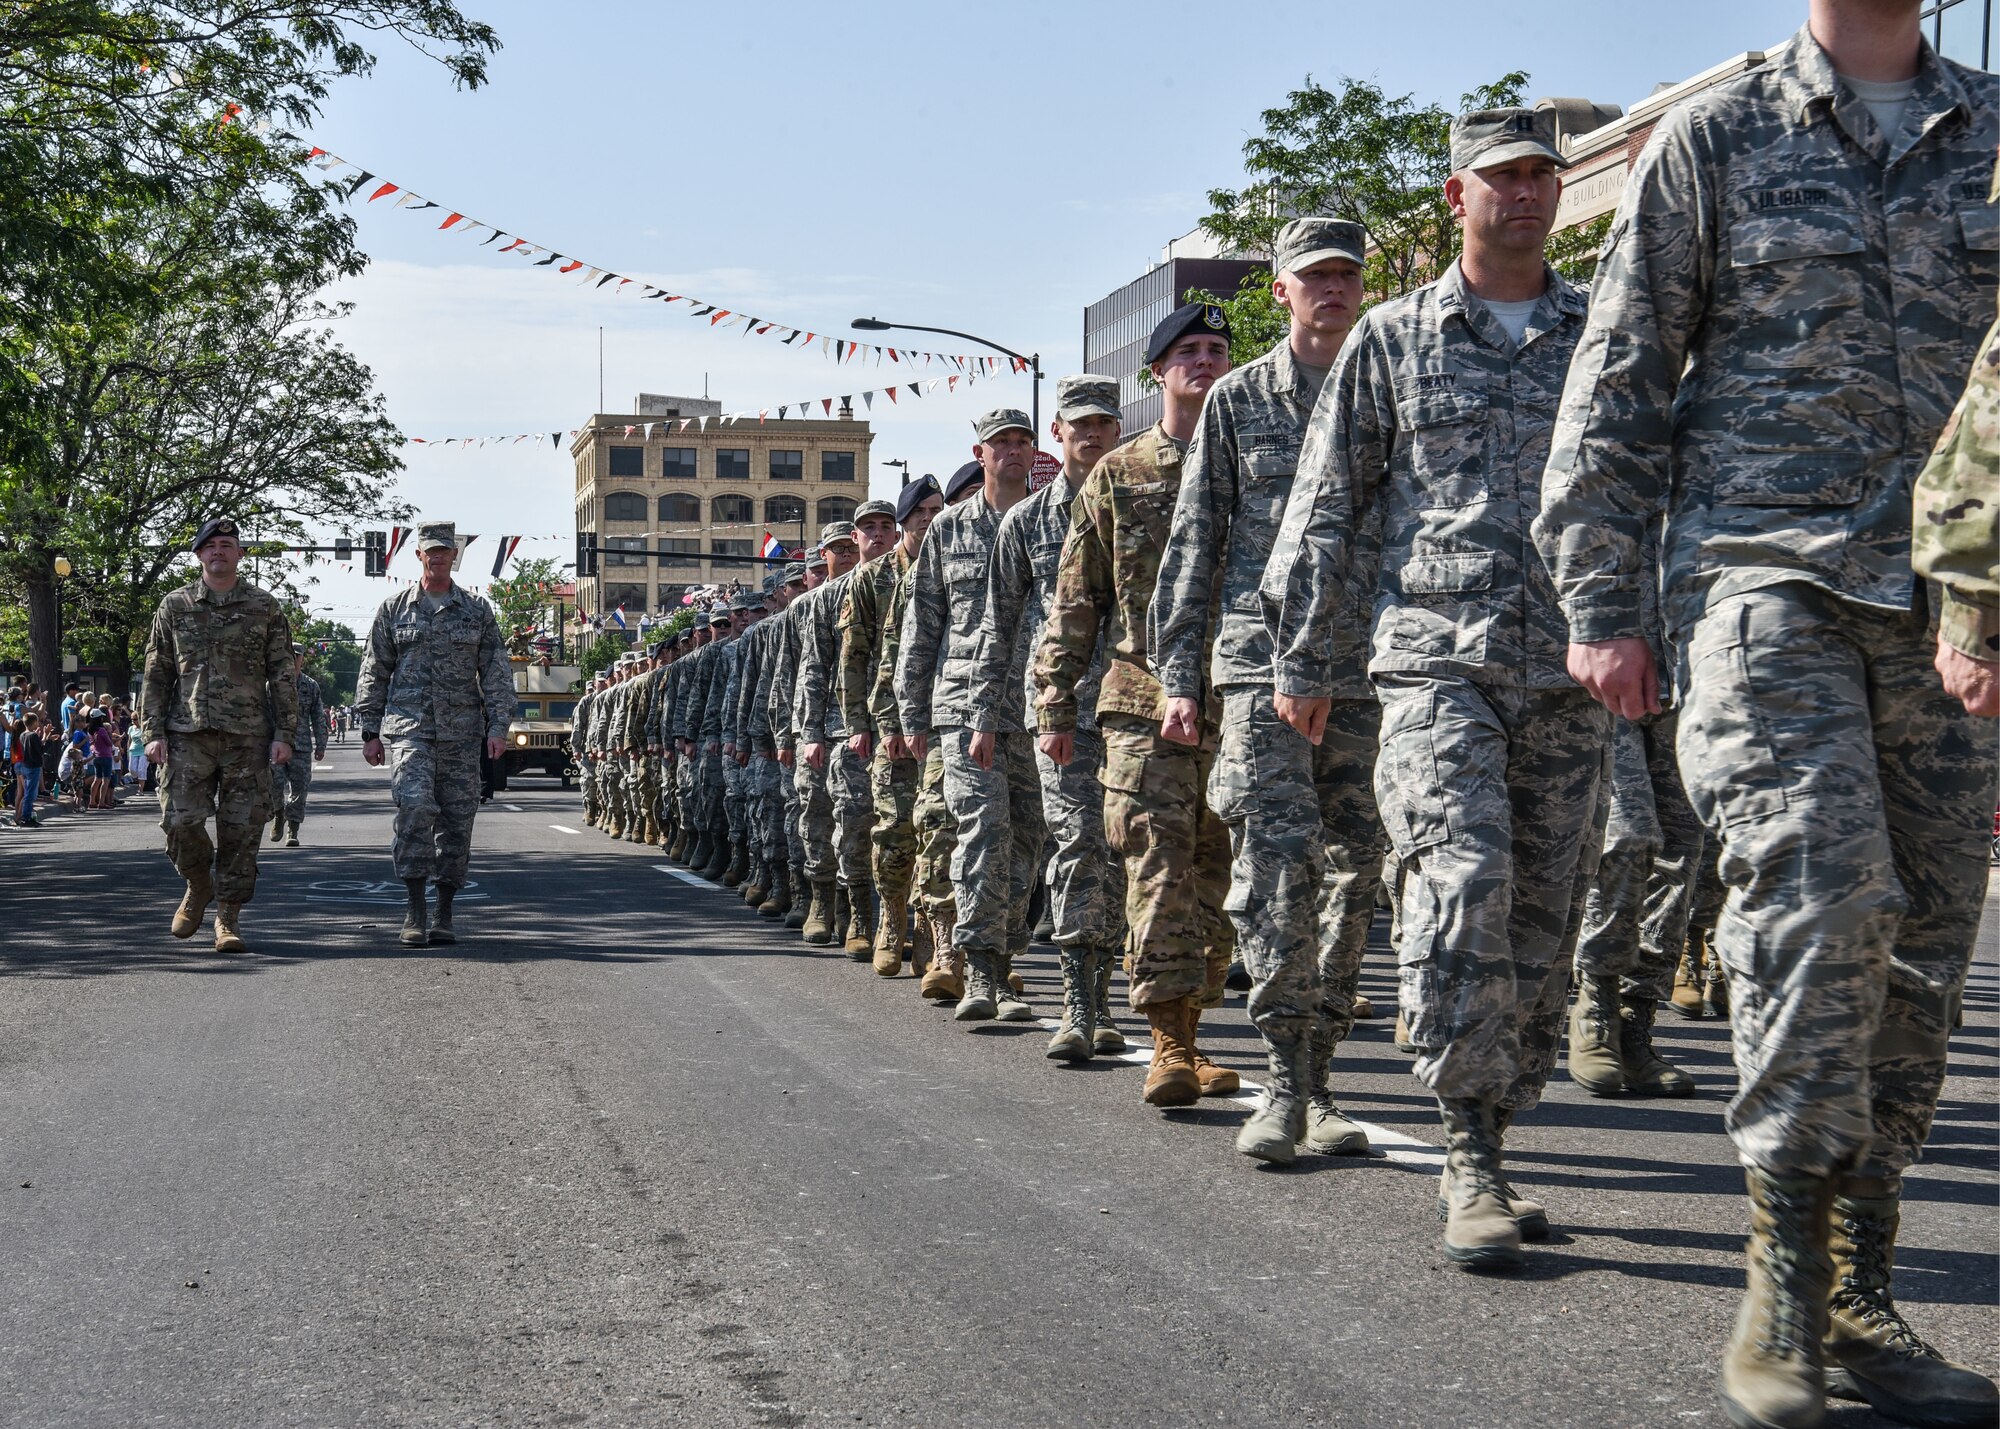 Airmen from F.E. Warren Air Force Base, Wyo., march in formation during the 122nd Cheyenne Frontier Days Grand Parade in Cheyenne, Wyo., July 21, 2018. Service members from multiple branches took part in the parade. This year marks the 151st anniversary of F.E. Warren Air Force Base and the city of Cheyenne. (U.S. Air Force photo by Airman 1st Class Braydon Williams)